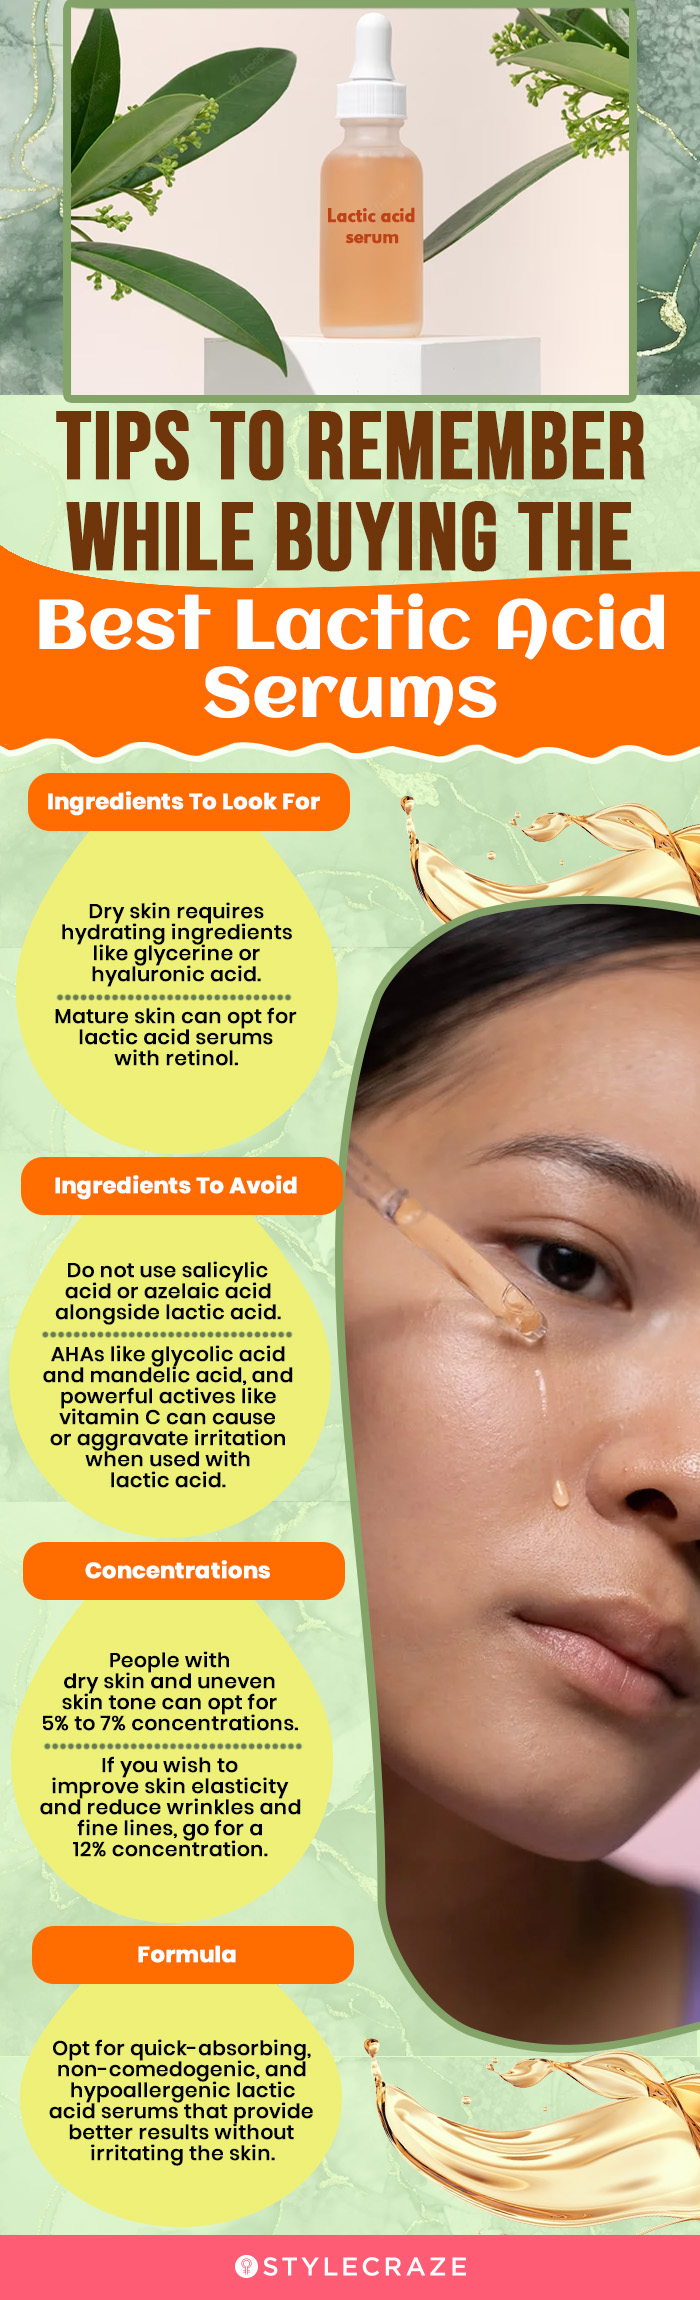 Tips To Remember While Buying The Best Lactic Acid Serums (infographic)